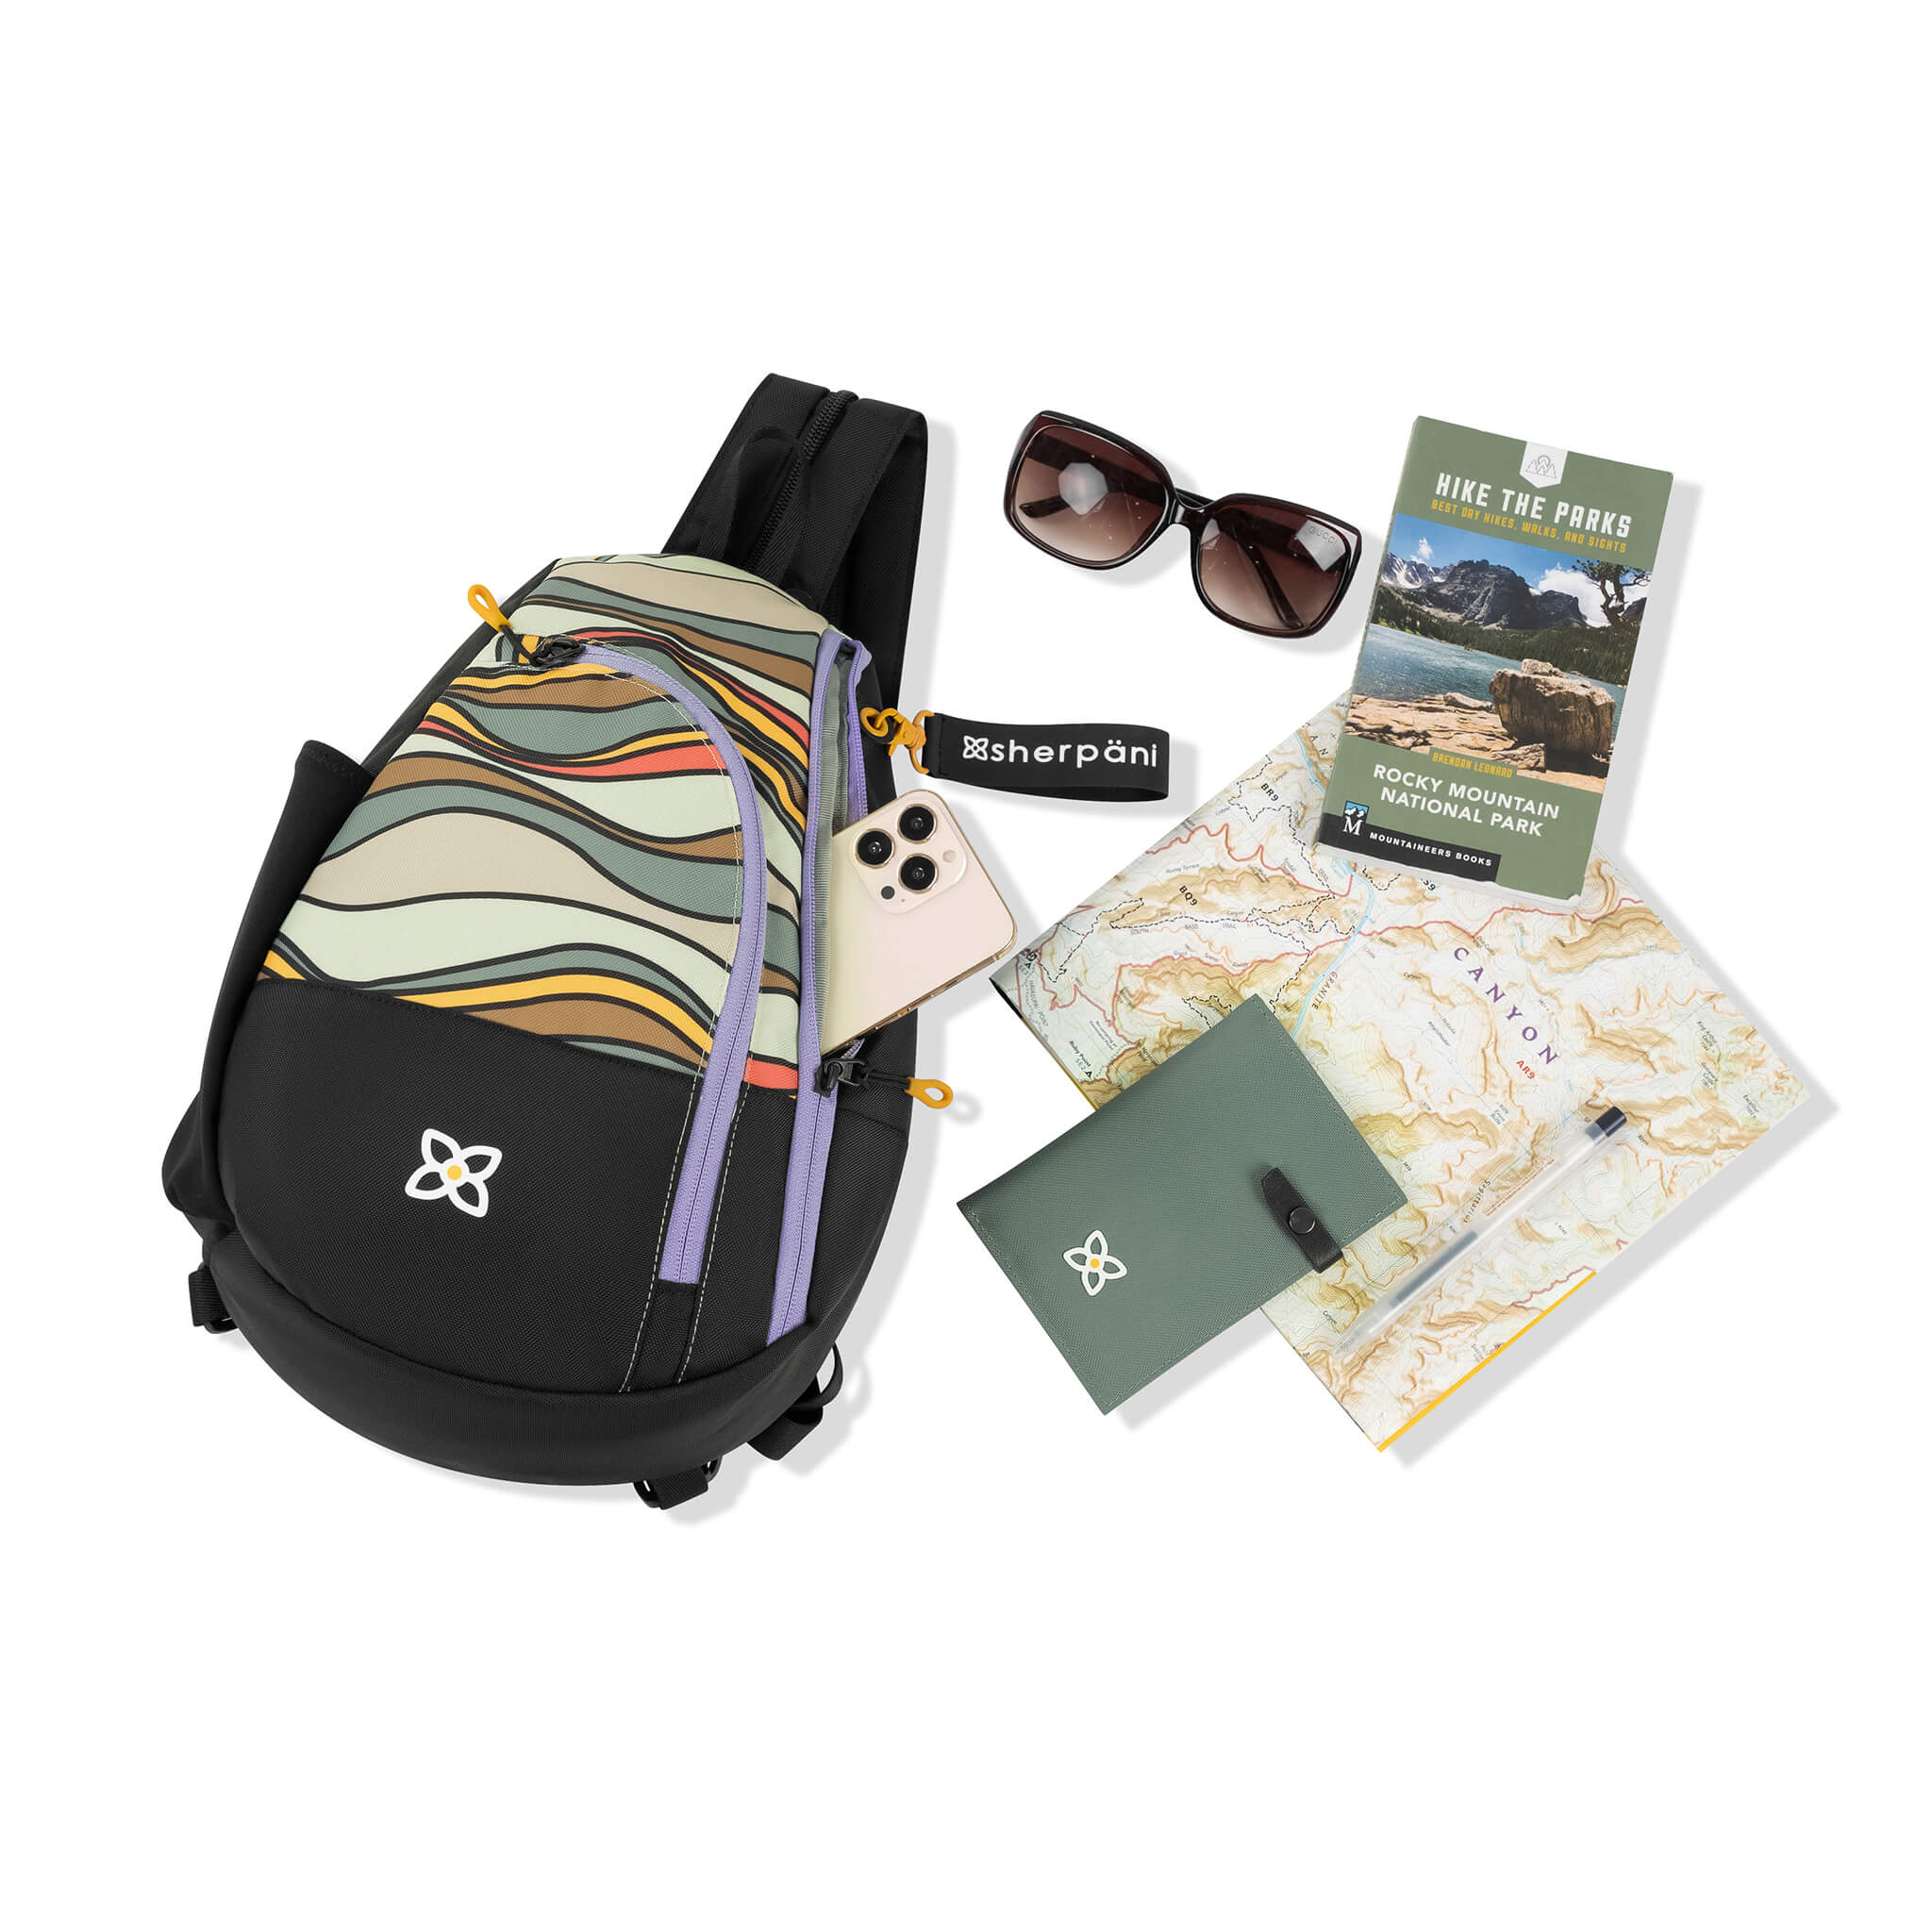 Sherpani women's sling bag for travel the Wayfarer, surrounded by example items for packing. 